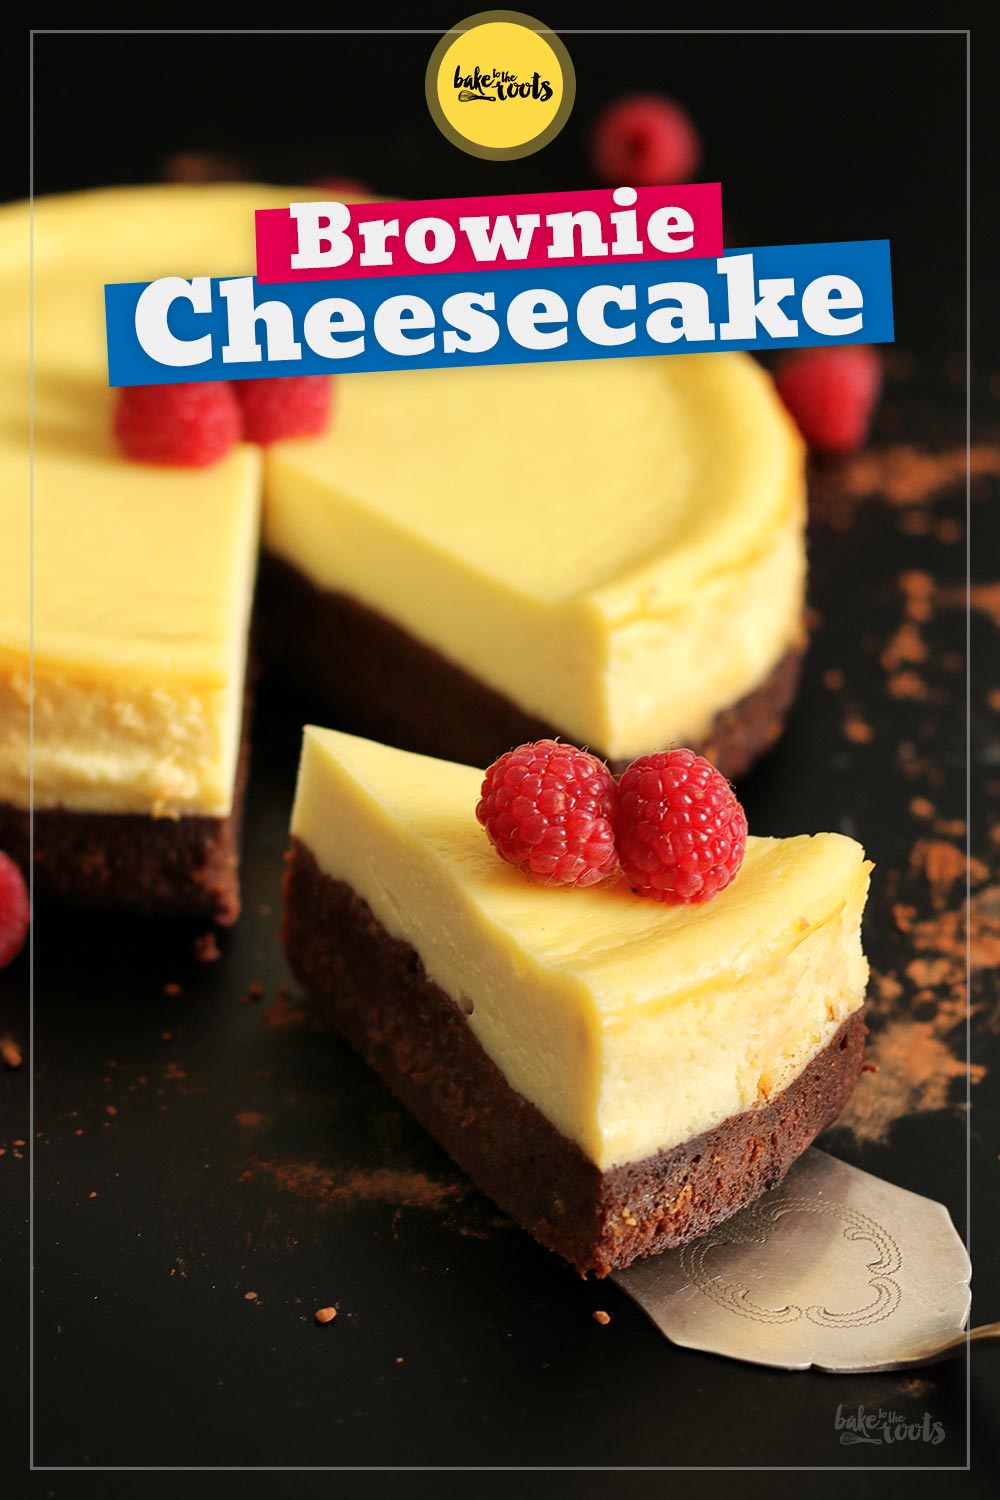 Brownie Cheesecake | Bake to the roots